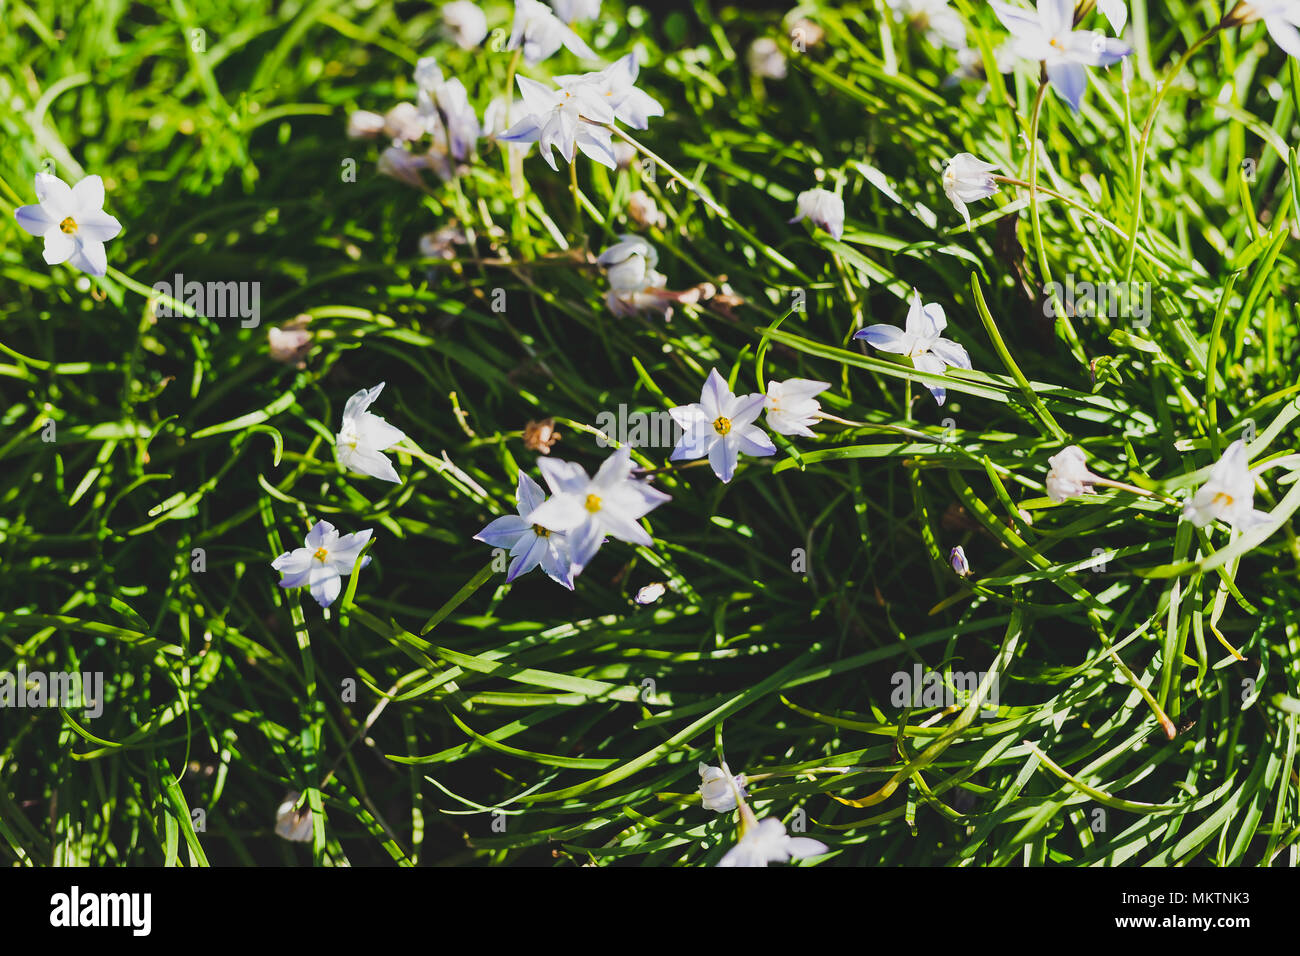 white grassnut flowers in the ground in city park, shot at shallow depth of field on a sunny spring day Stock Photo